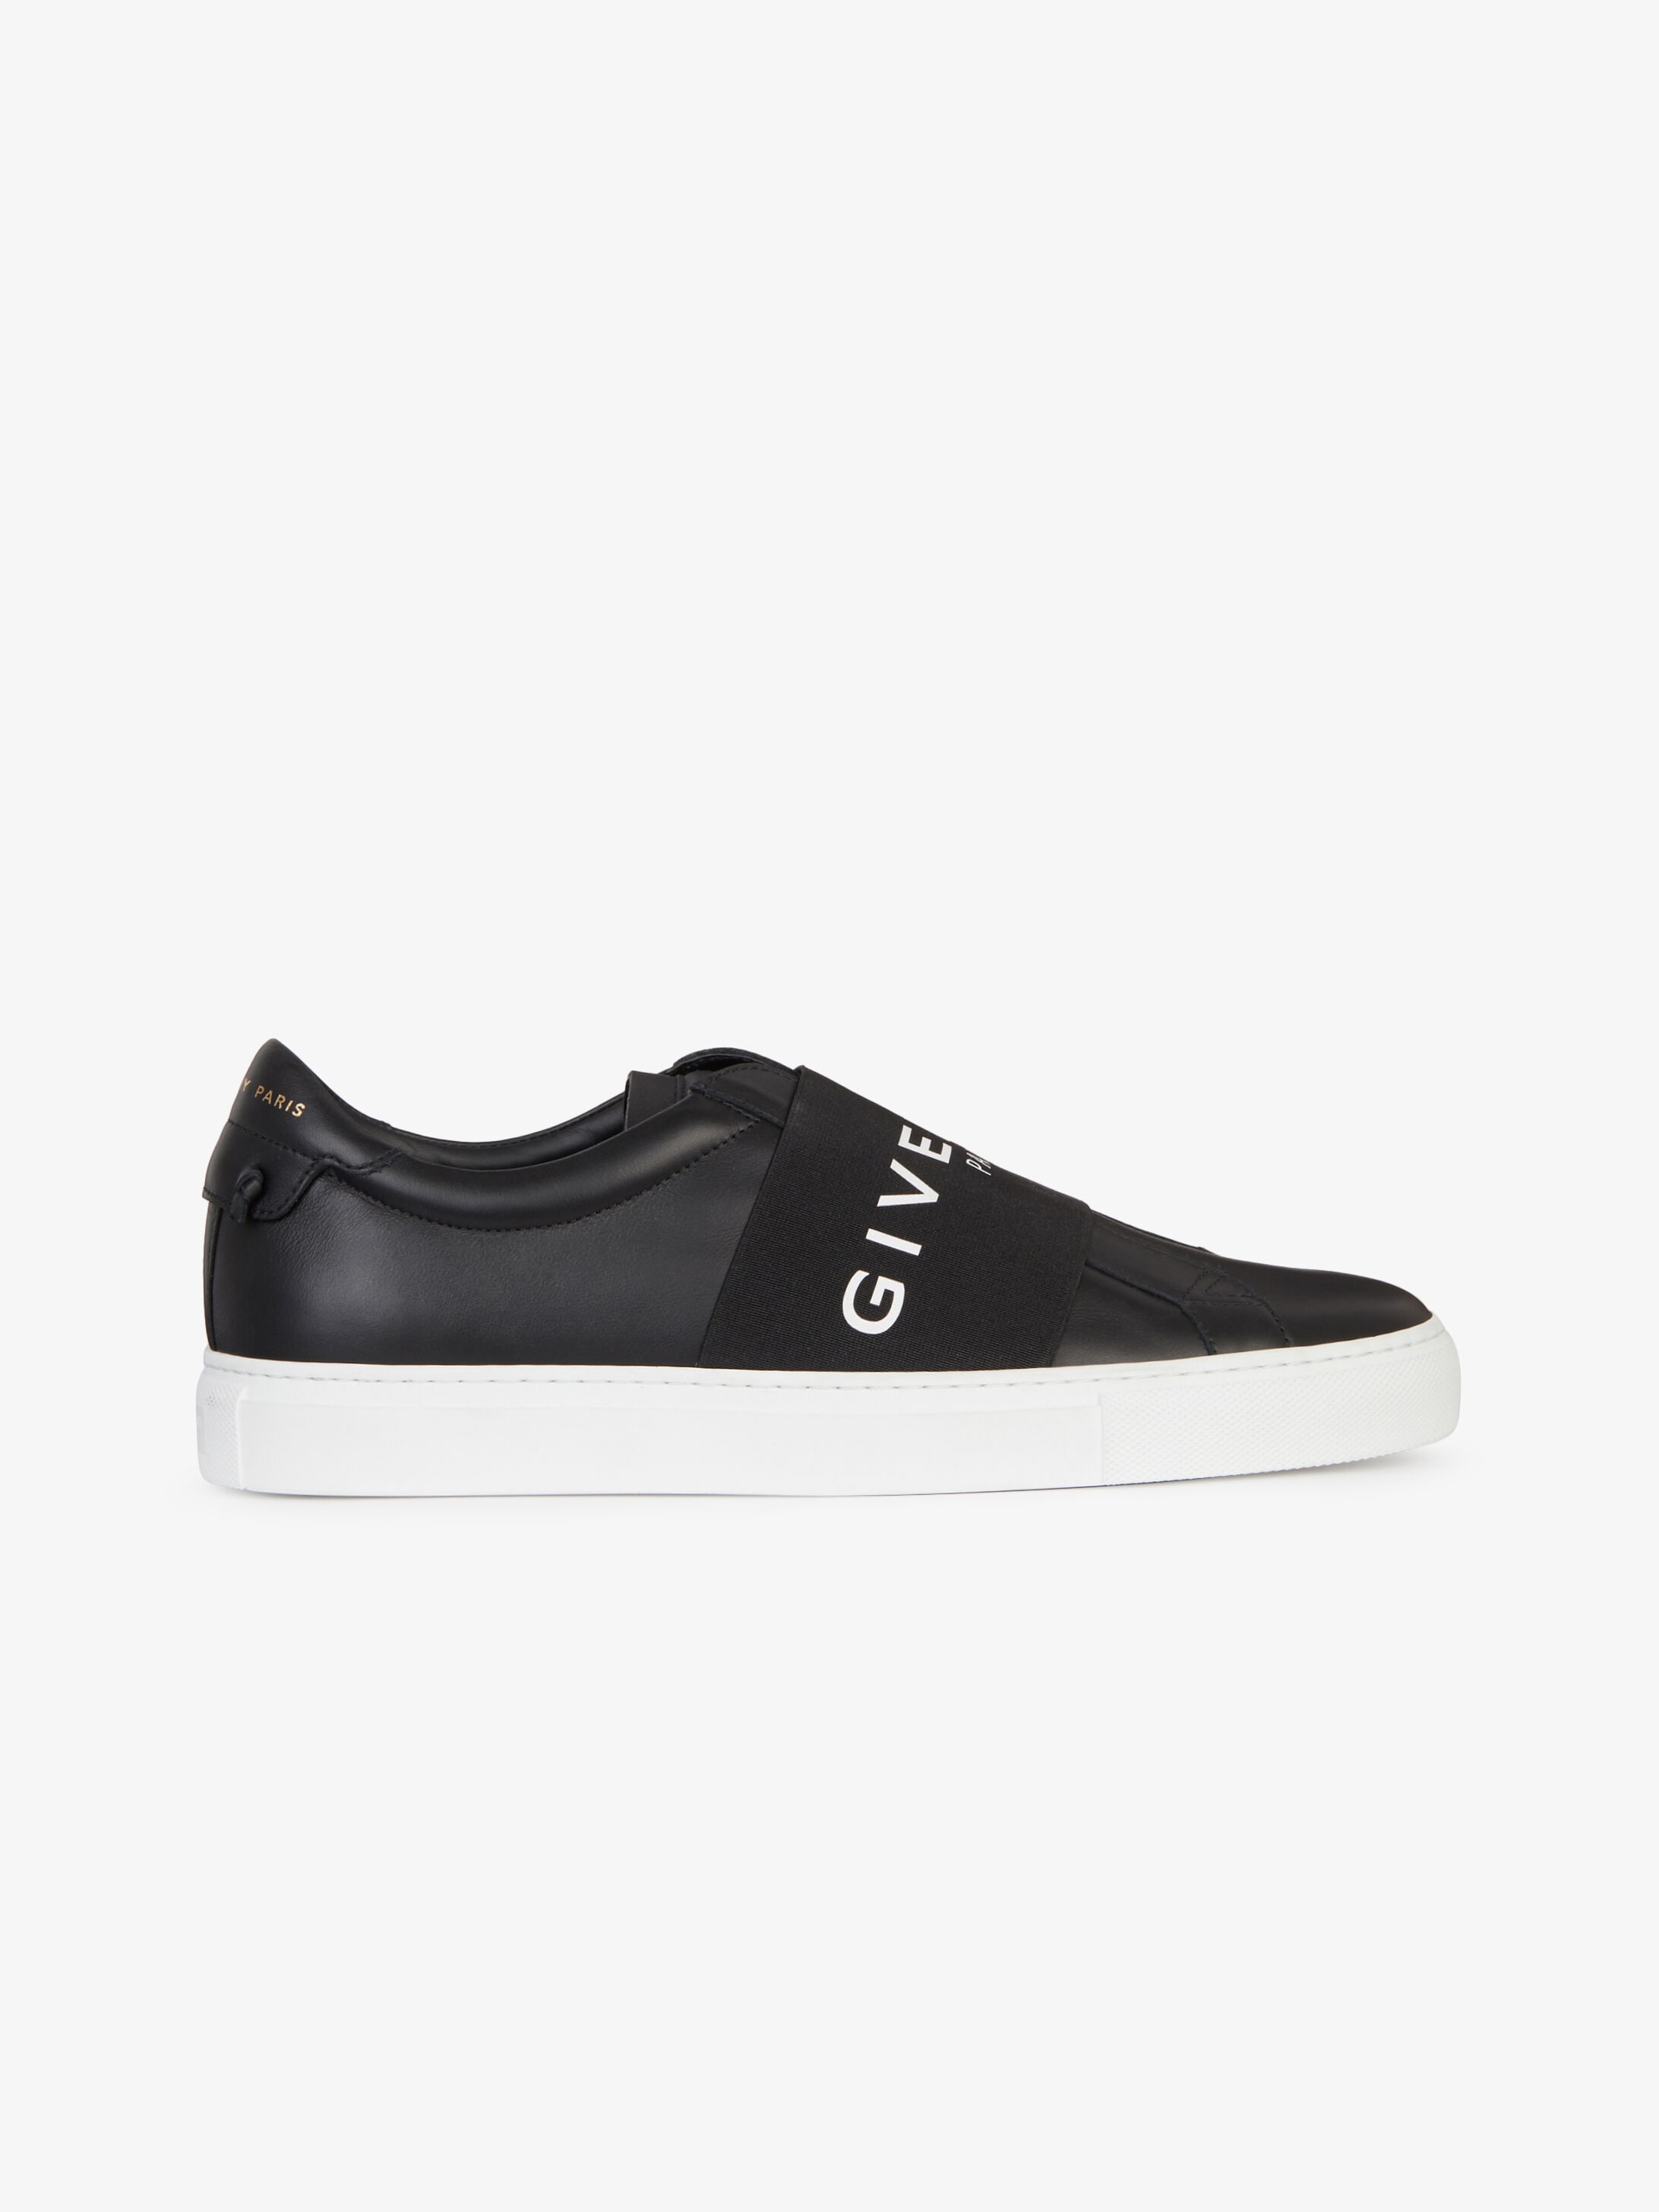 givenchy sneakers black and white